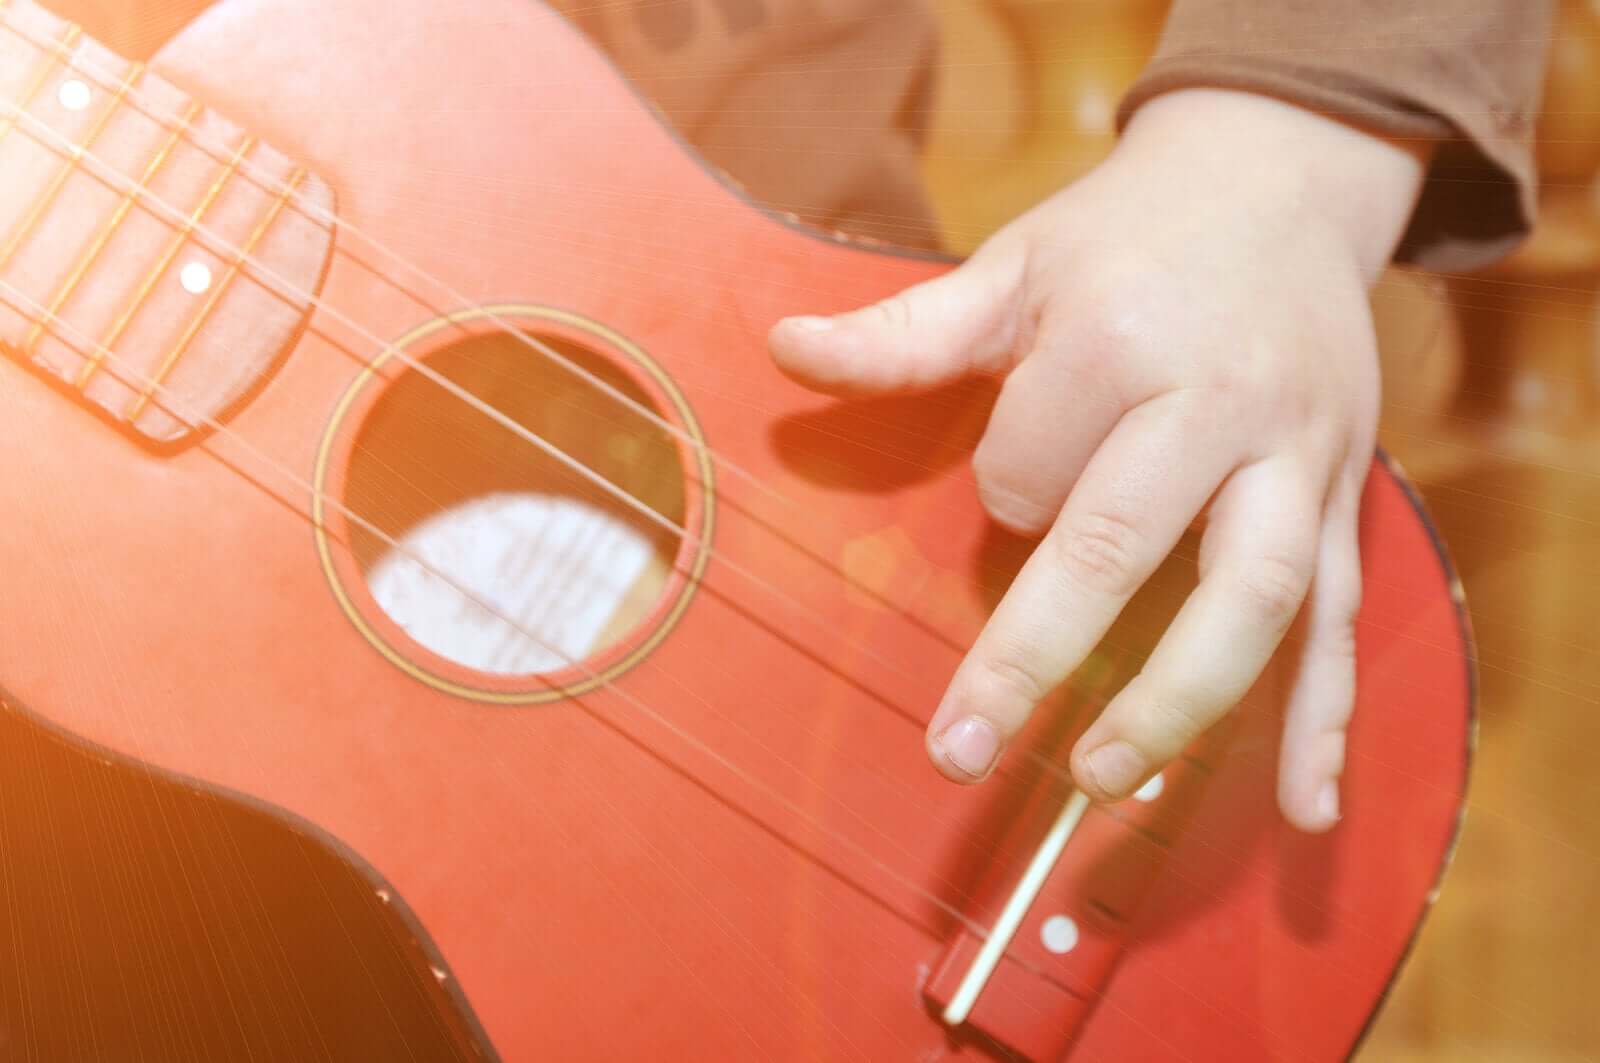 How to Make Your Own Musical Instruments